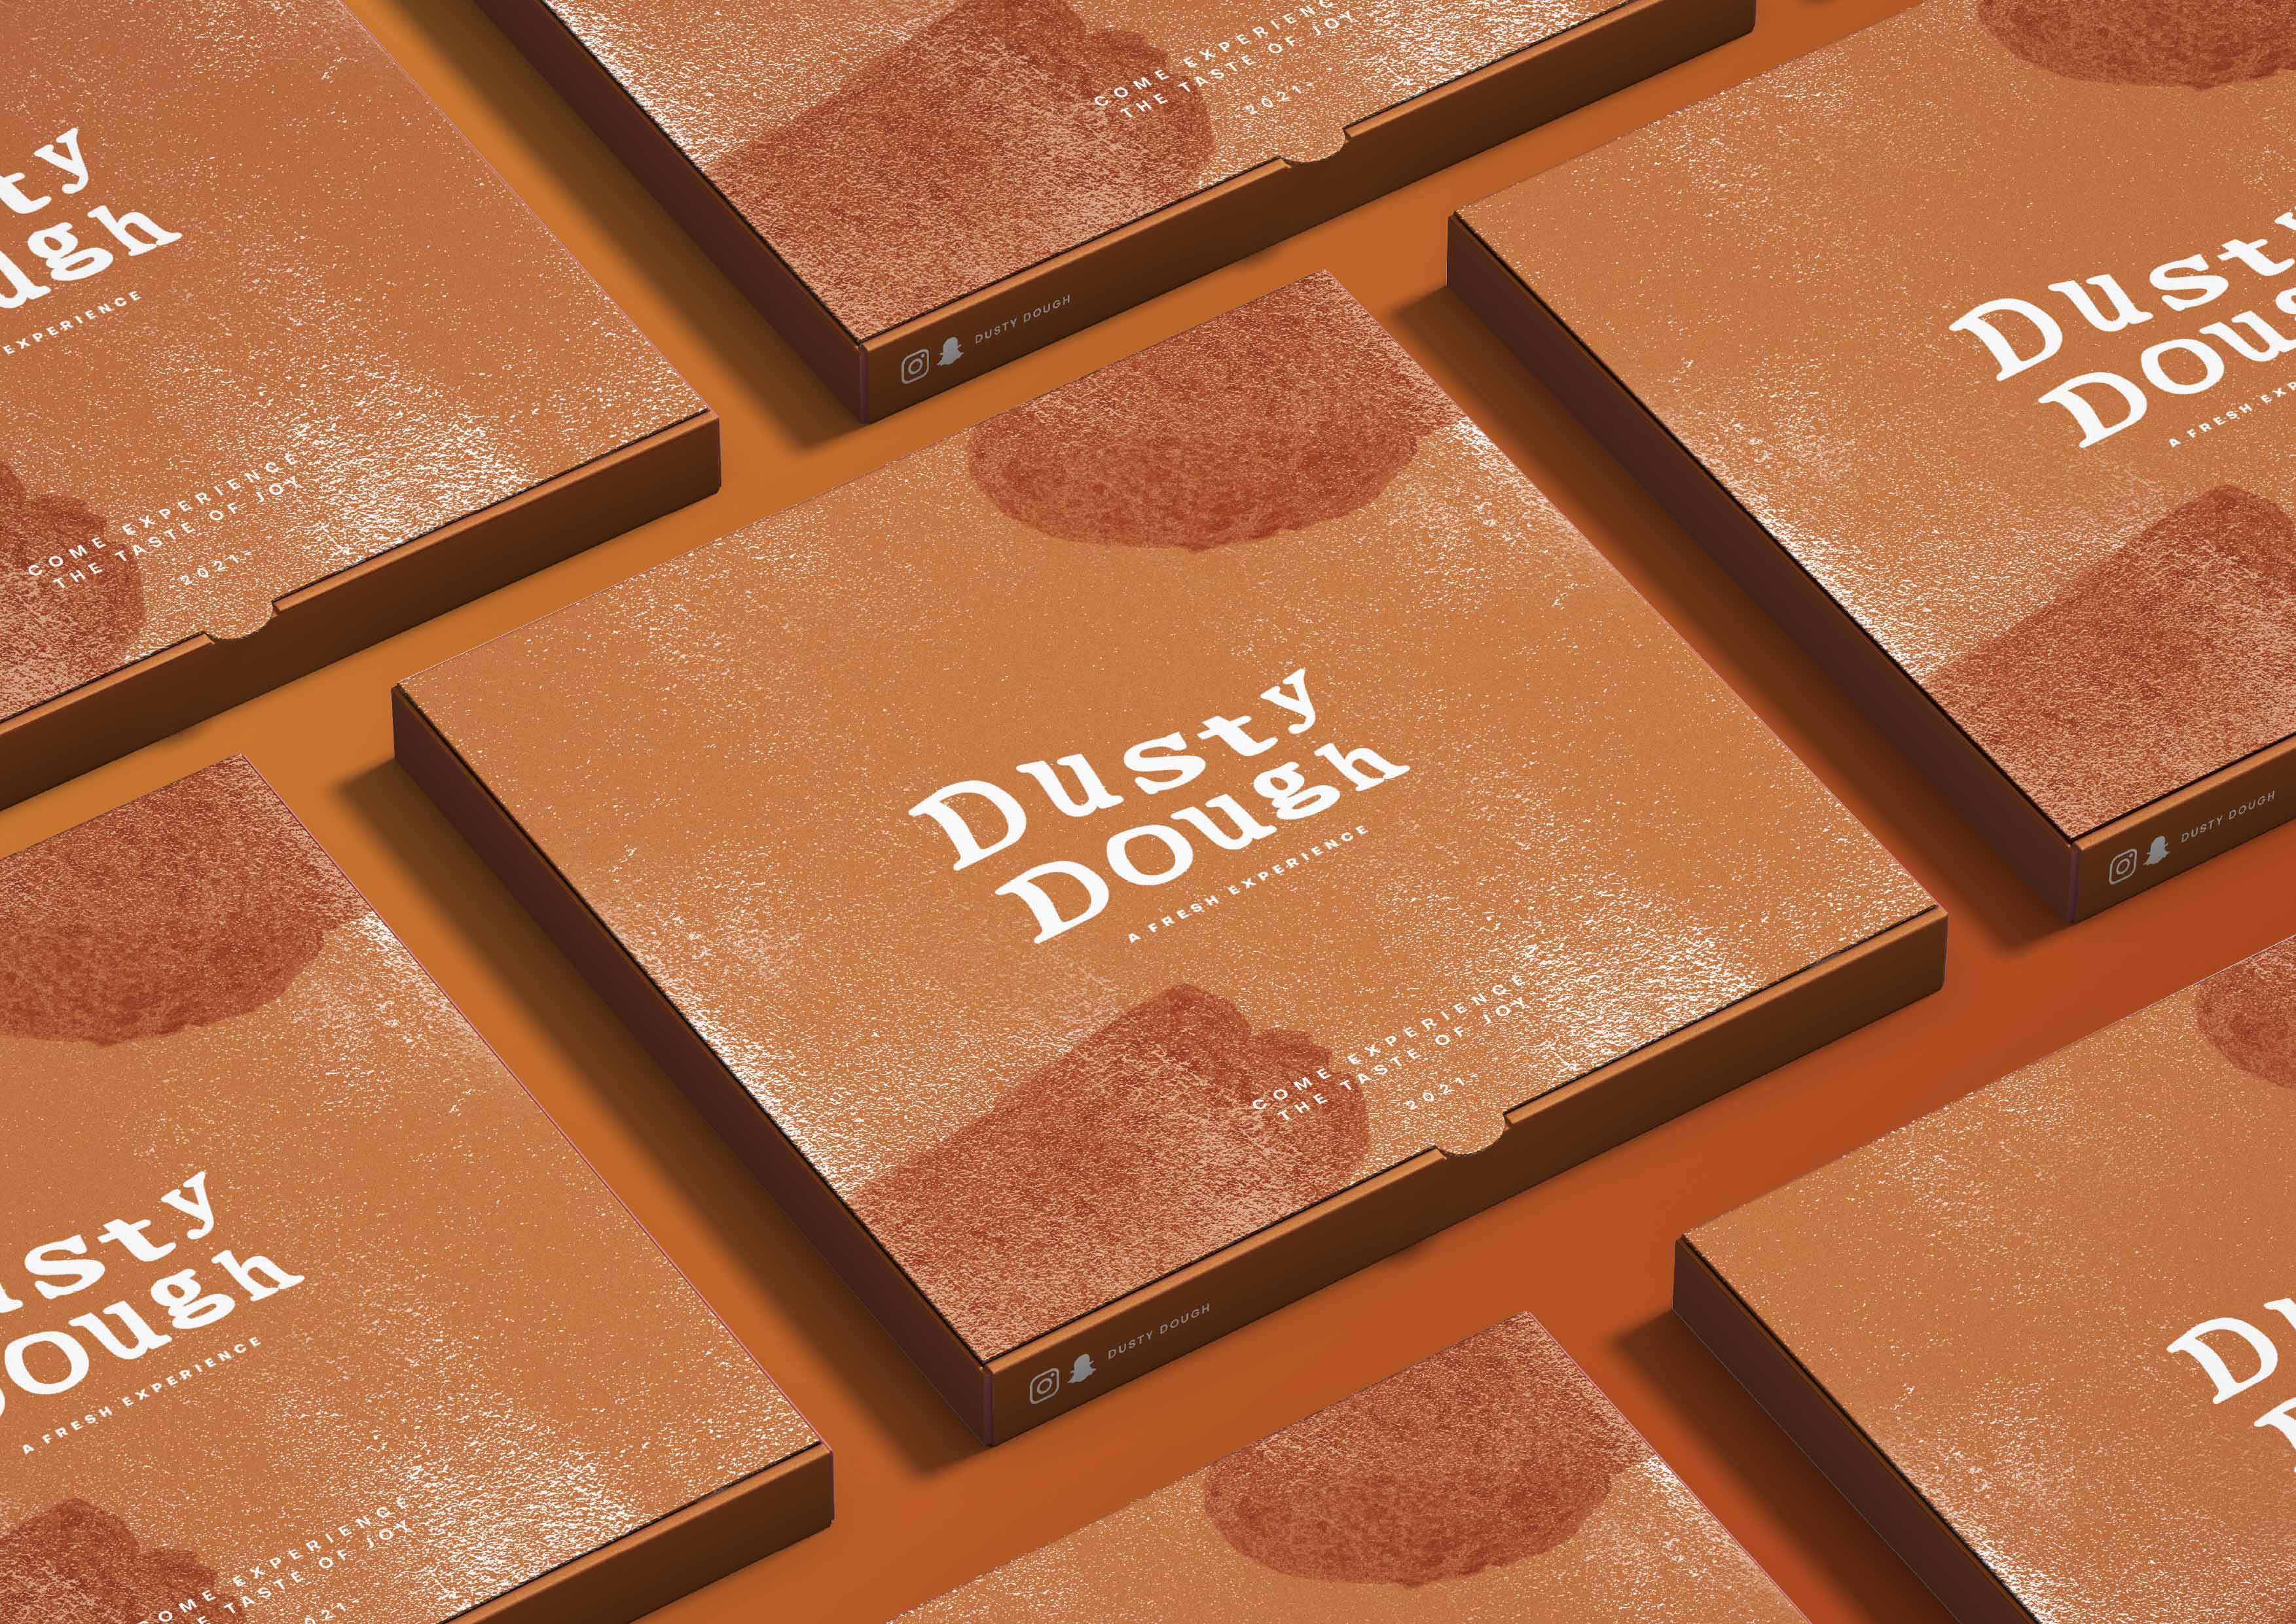 “Dusty Dough: A Haven of Happiness and Sweets in the Heart of Riyadh”